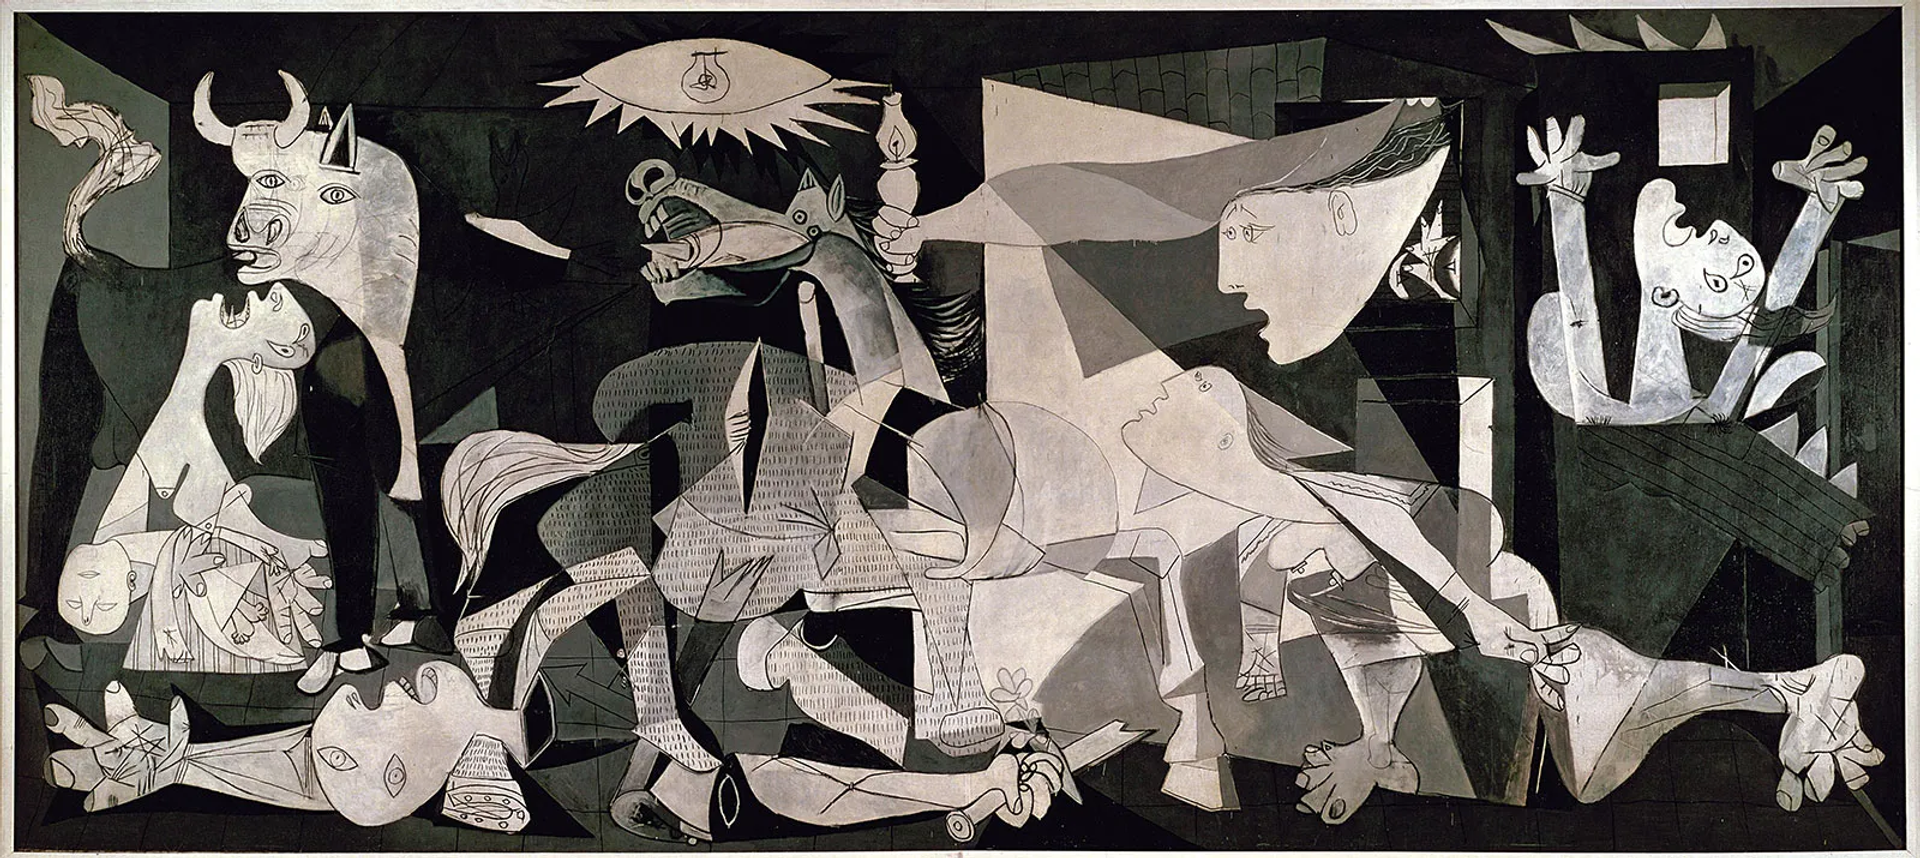 Selfie-Gate: Photo Ban Lifted on Pablo Picasso’s Guernica